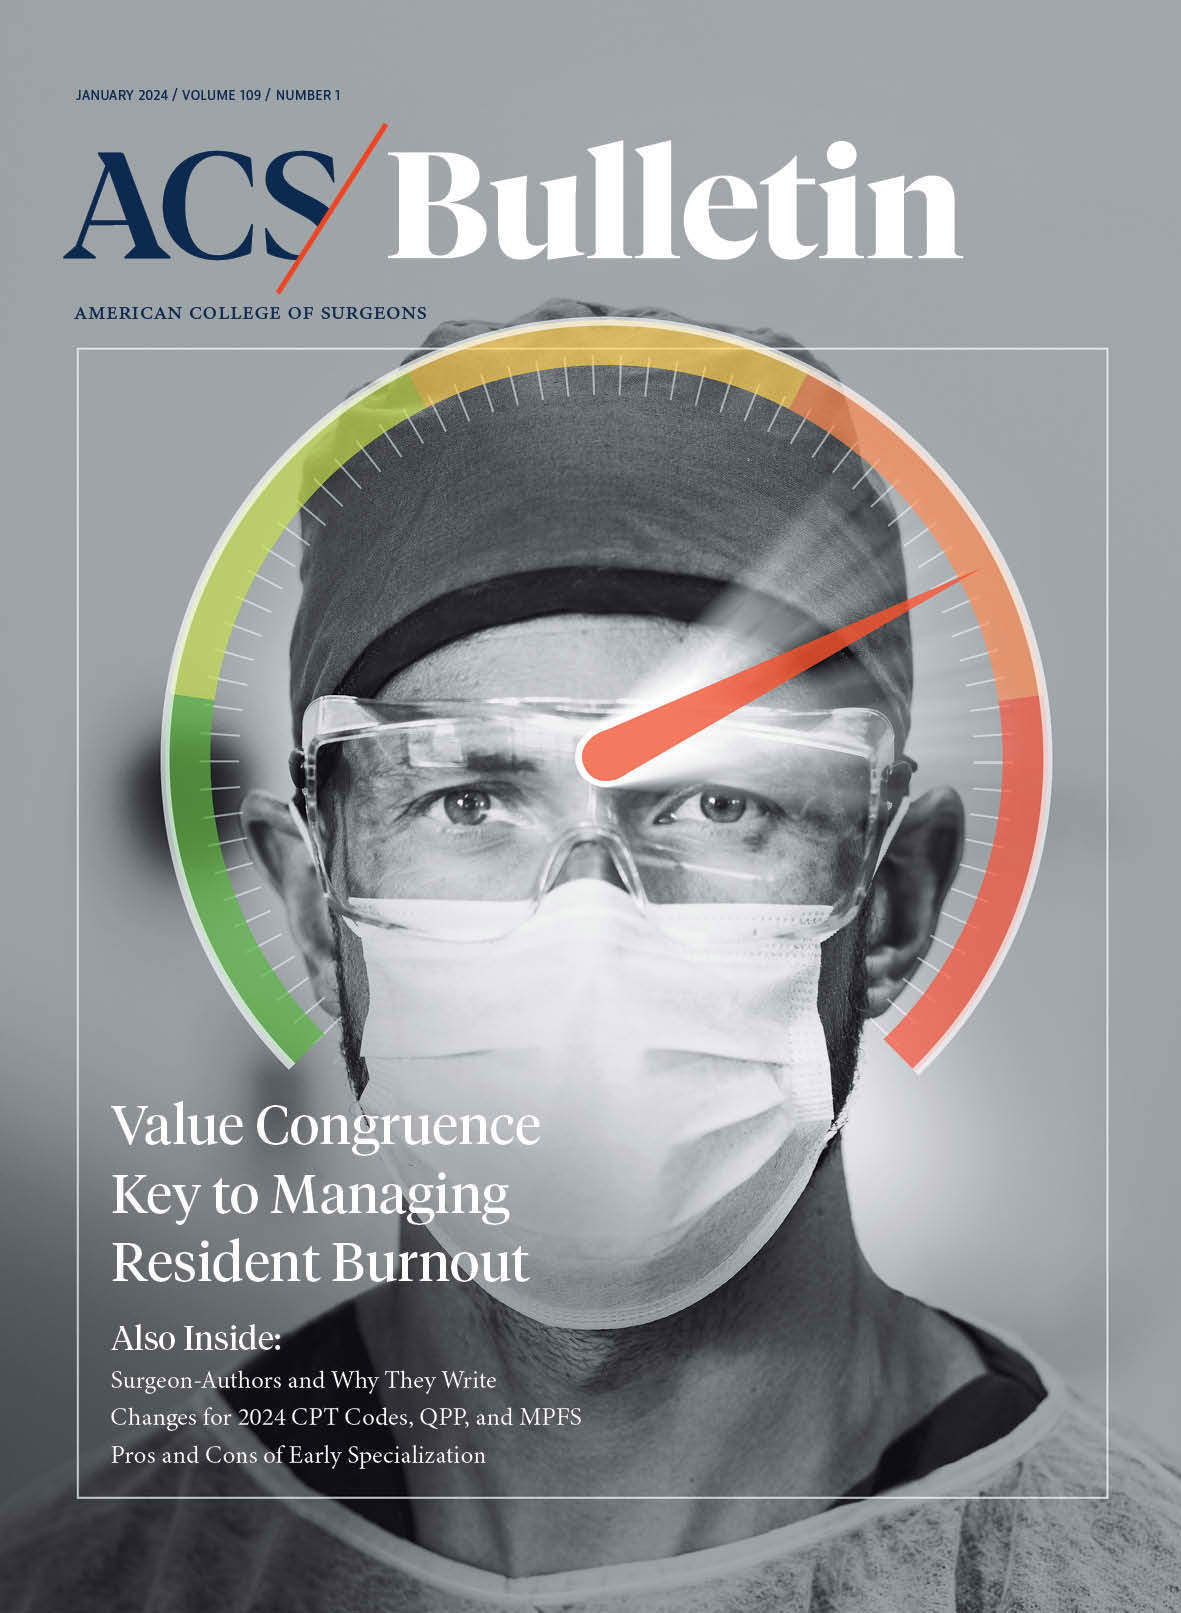 Read about Value Congruence for Managing Burnout, Coding Updates, and More in New Bulletin